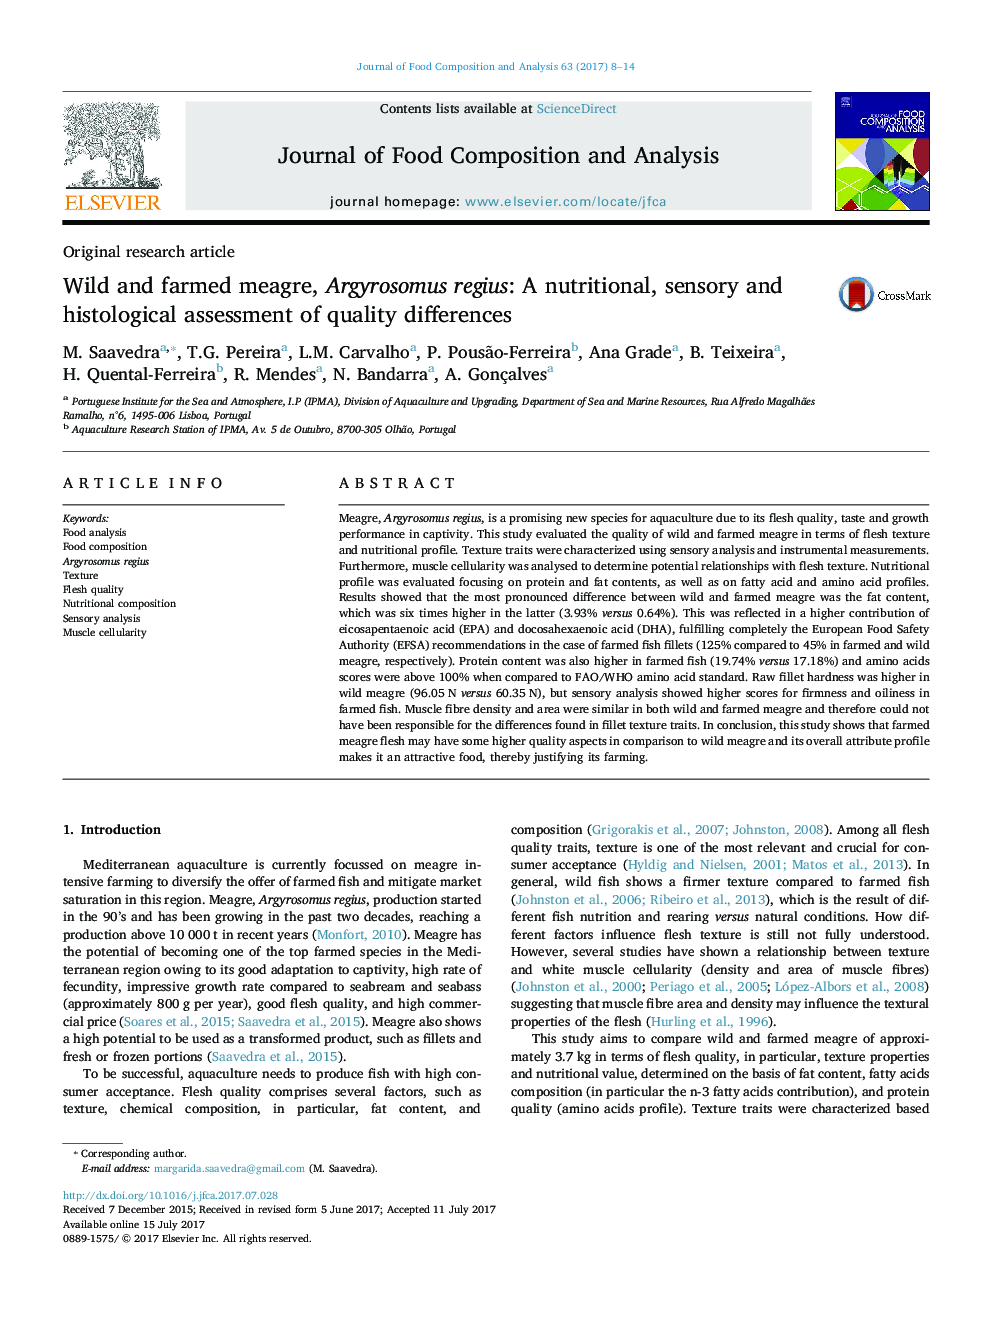 Original research articleWild and farmed meagre, Argyrosomus regius: A nutritional, sensory and histological assessment of quality differences